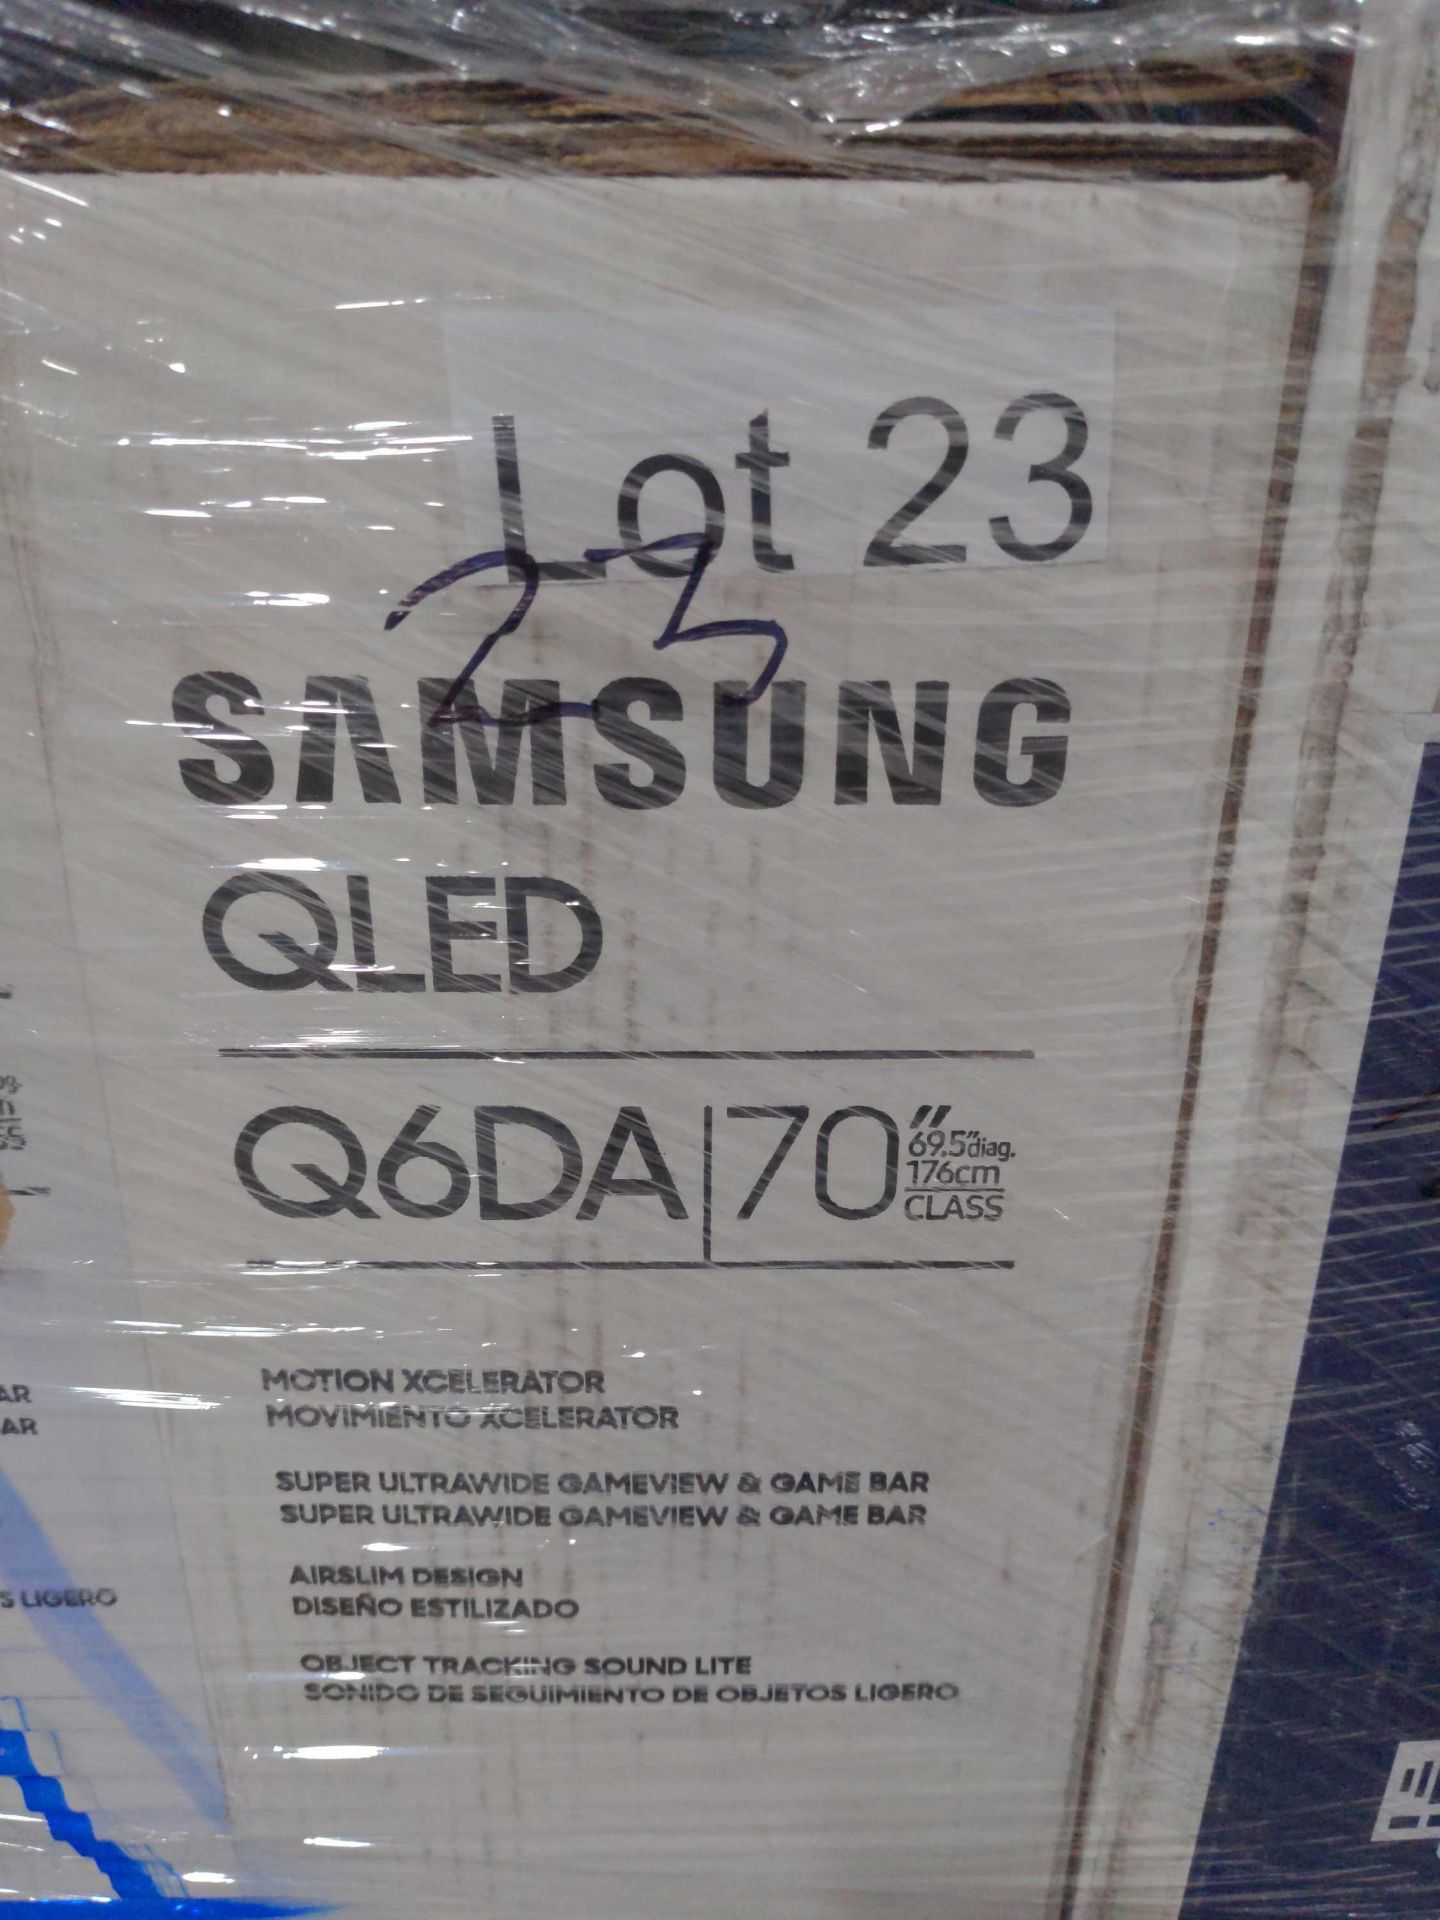 Samsung QLED 70" TV (grade a working & tested)